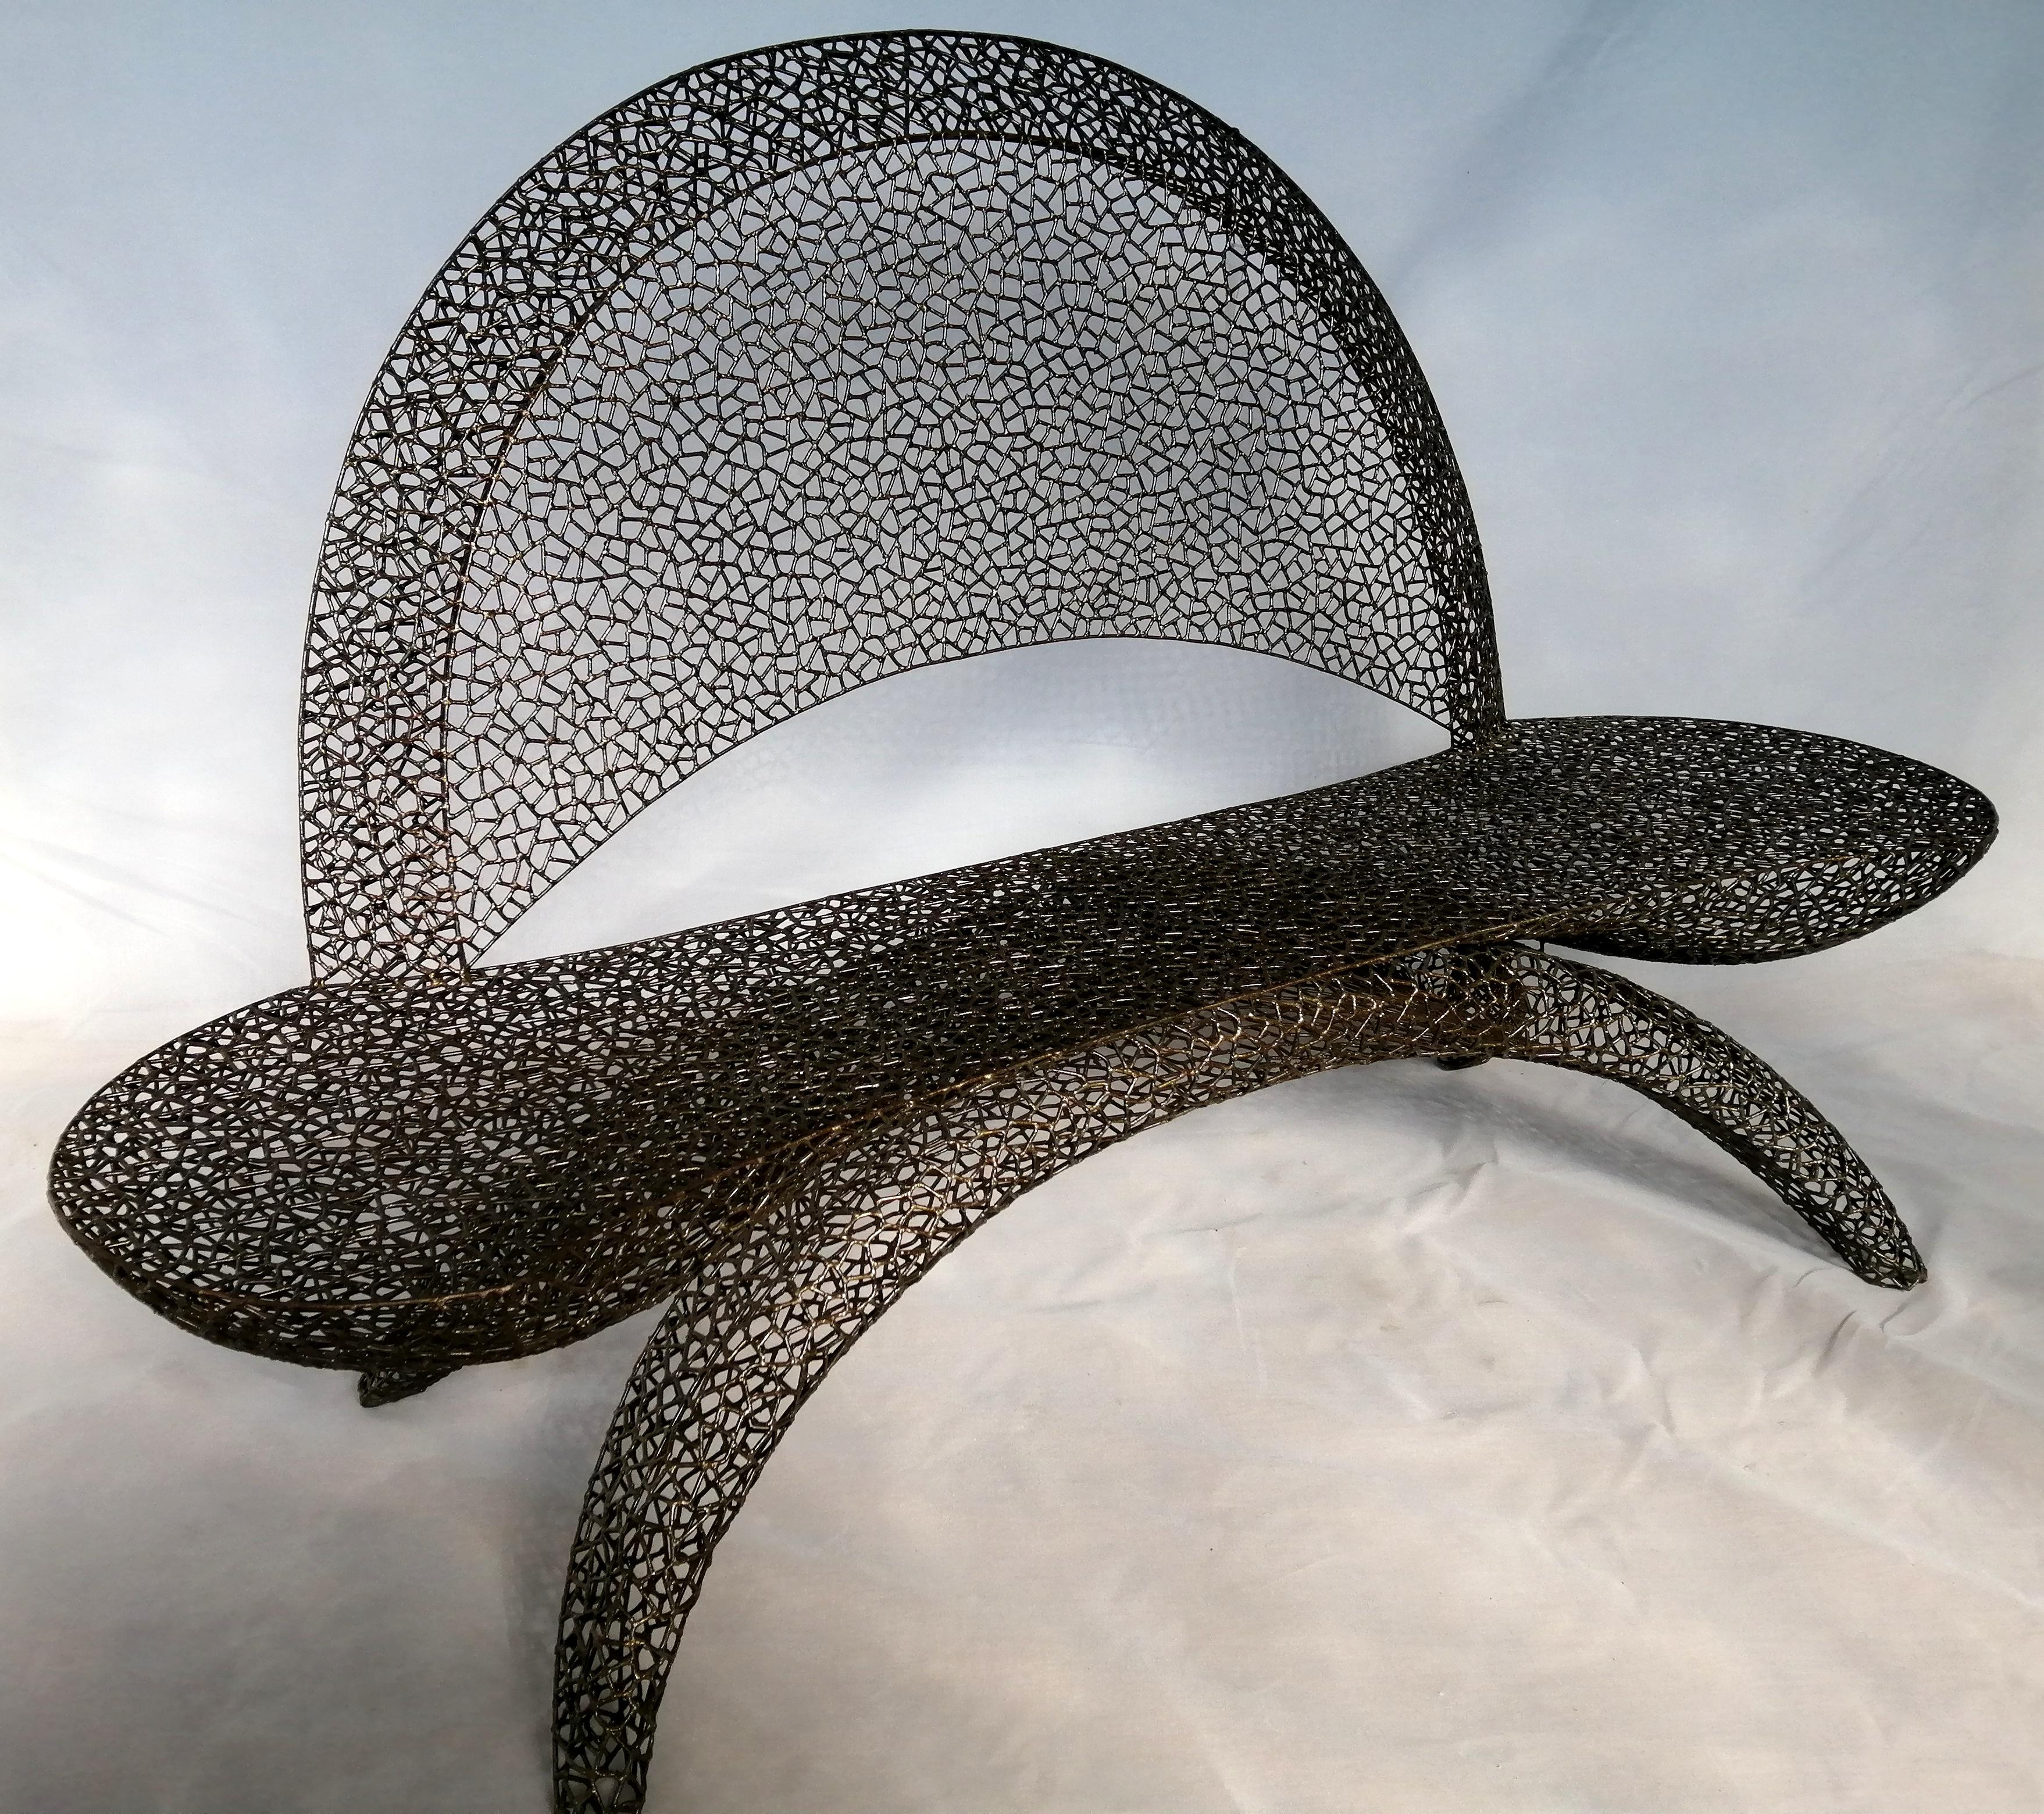 Construction technique: Hand-welded iron structure with lace with half-moon back
Color: Natural iron
Measures: Iron rod thickness 4 mm.